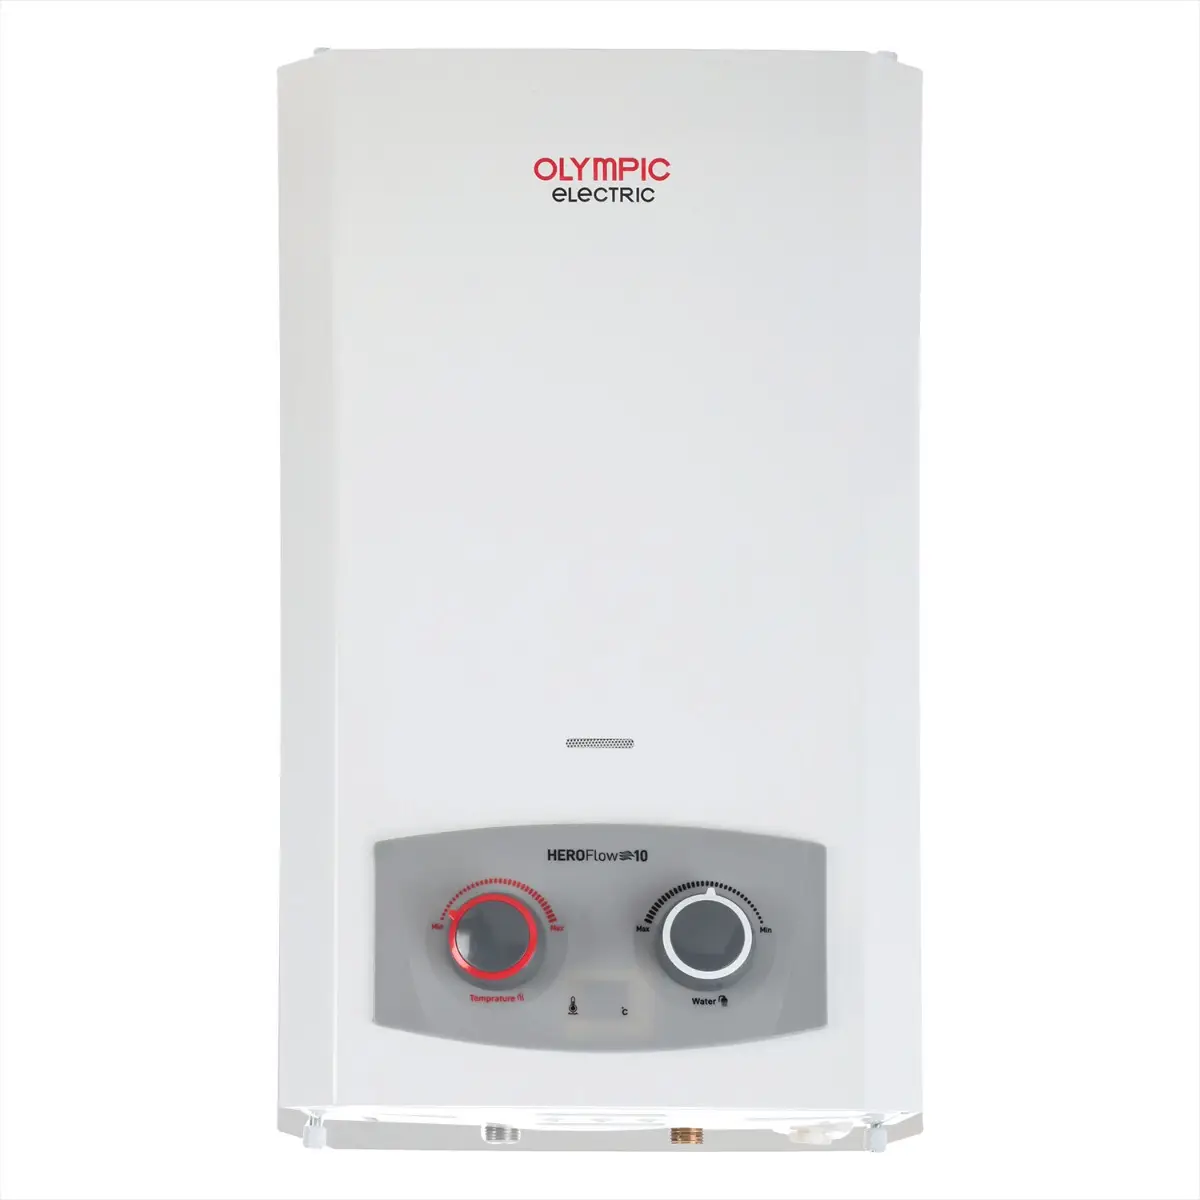 Olympic HeroFlow Gas Water Heater with Chimney, 10 Liters, White